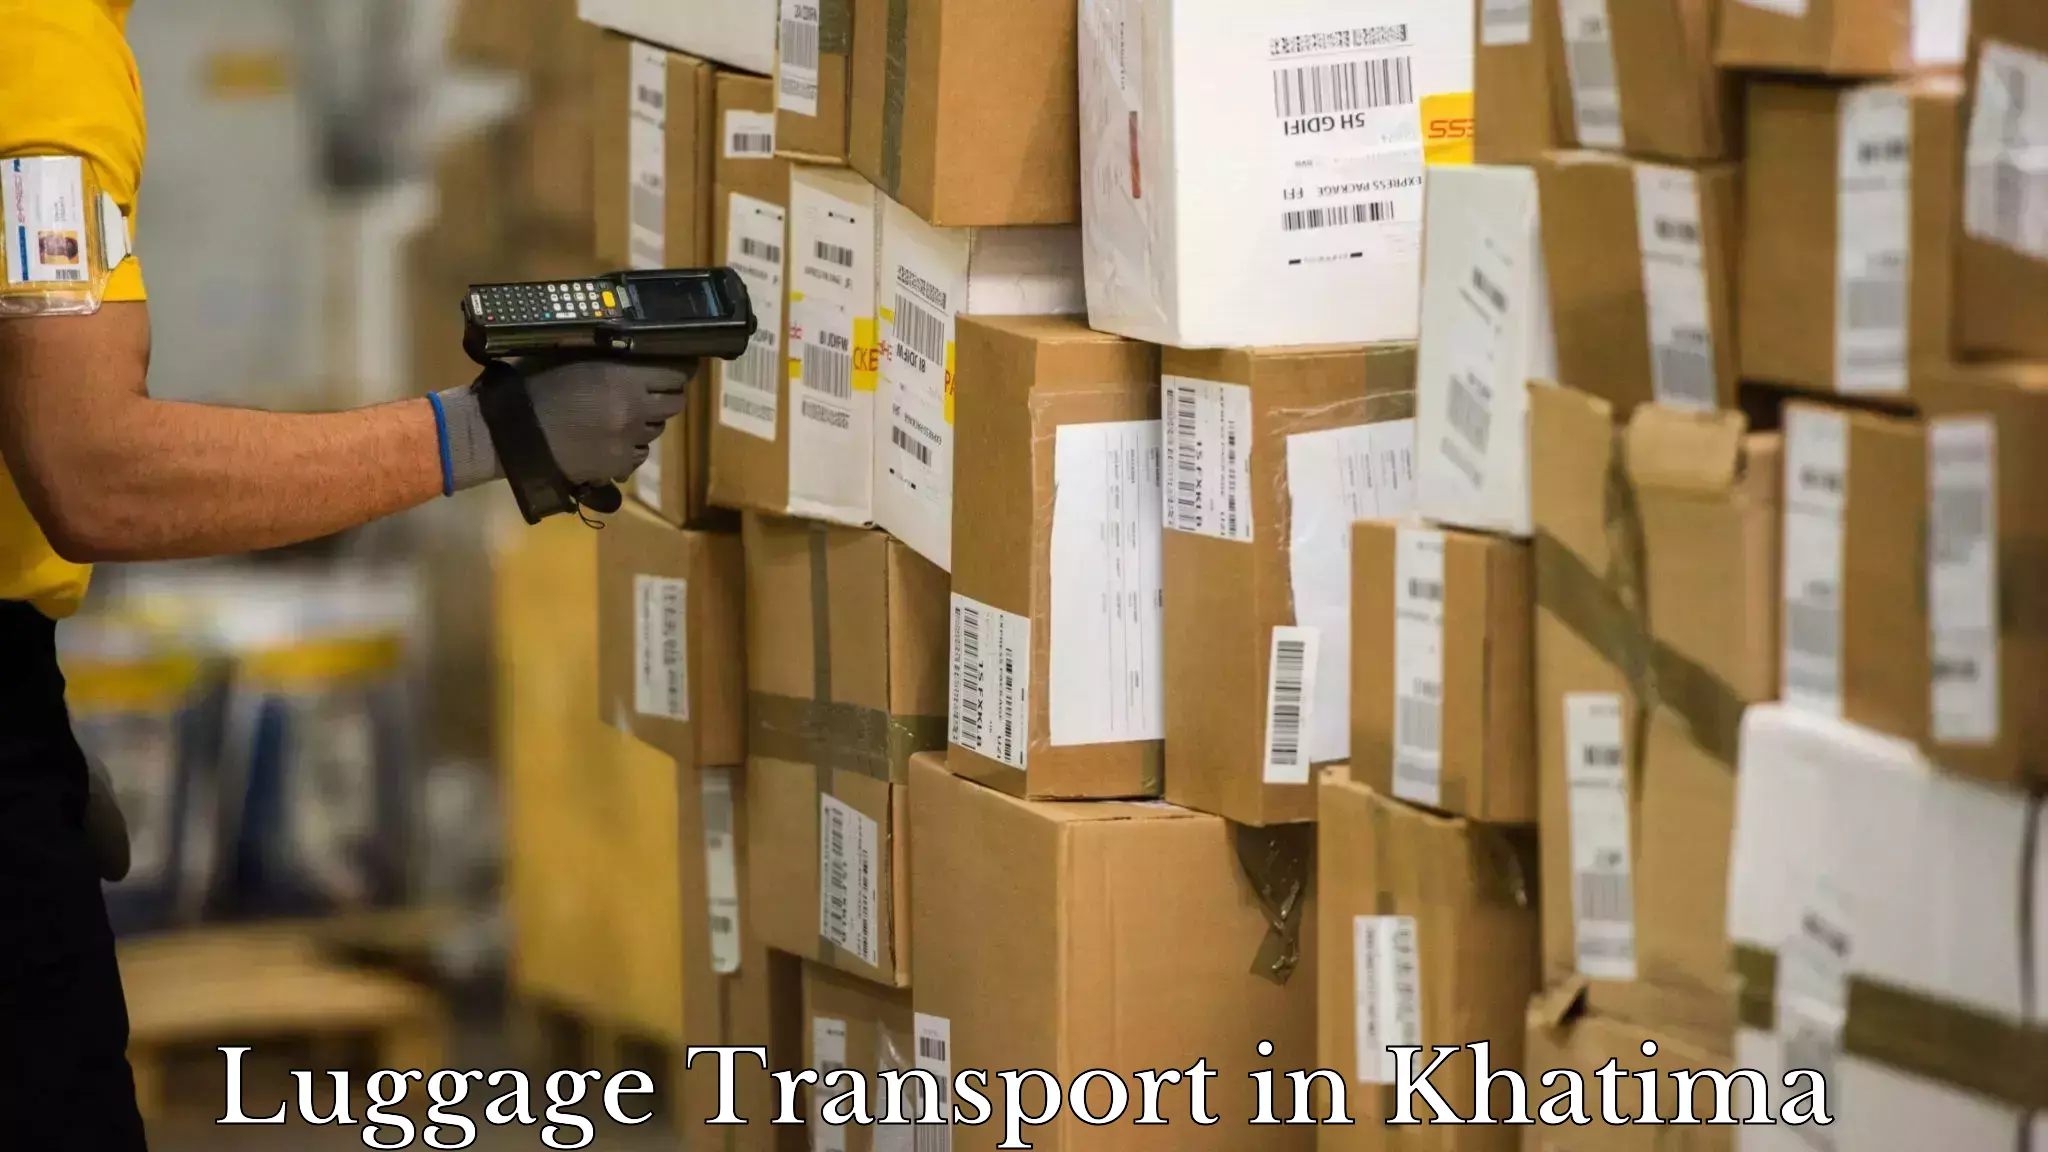 Baggage delivery management in Khatima